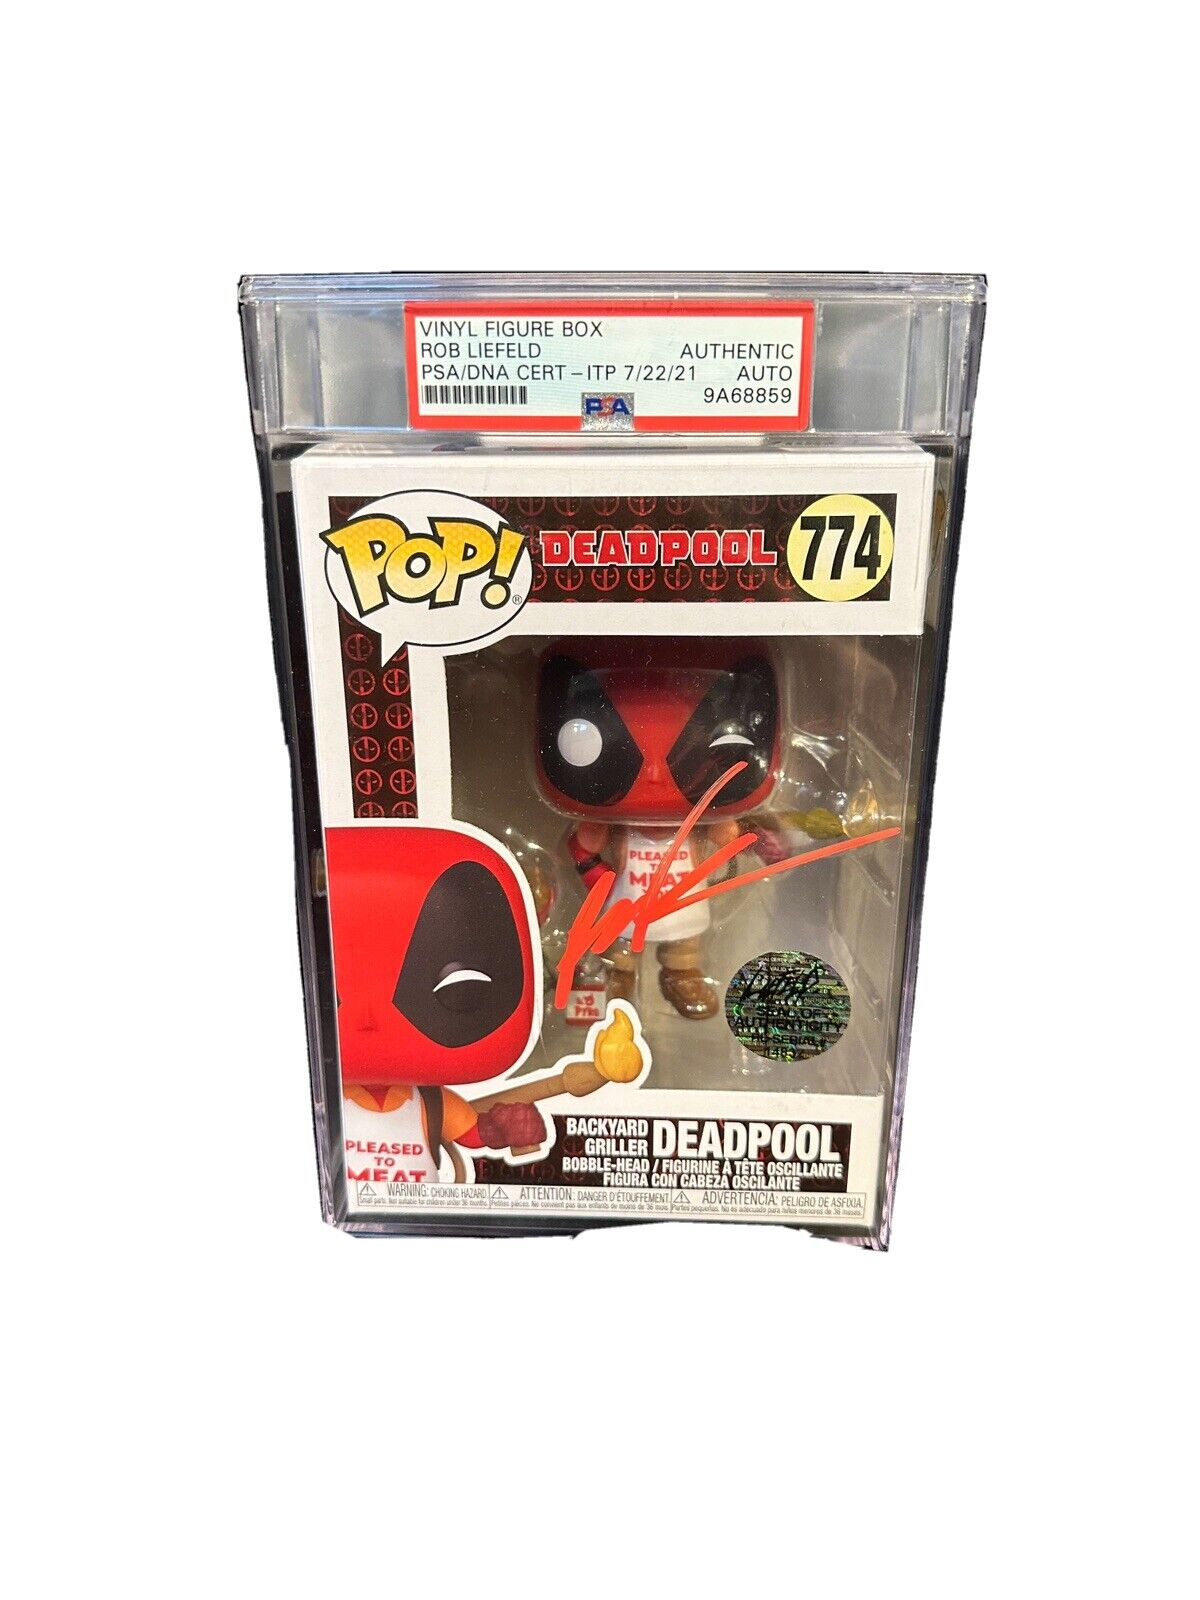 Backyard Griller Deadpool 774 Funko POP SIGNED BY ROB LIEFELD + PSA AUTH